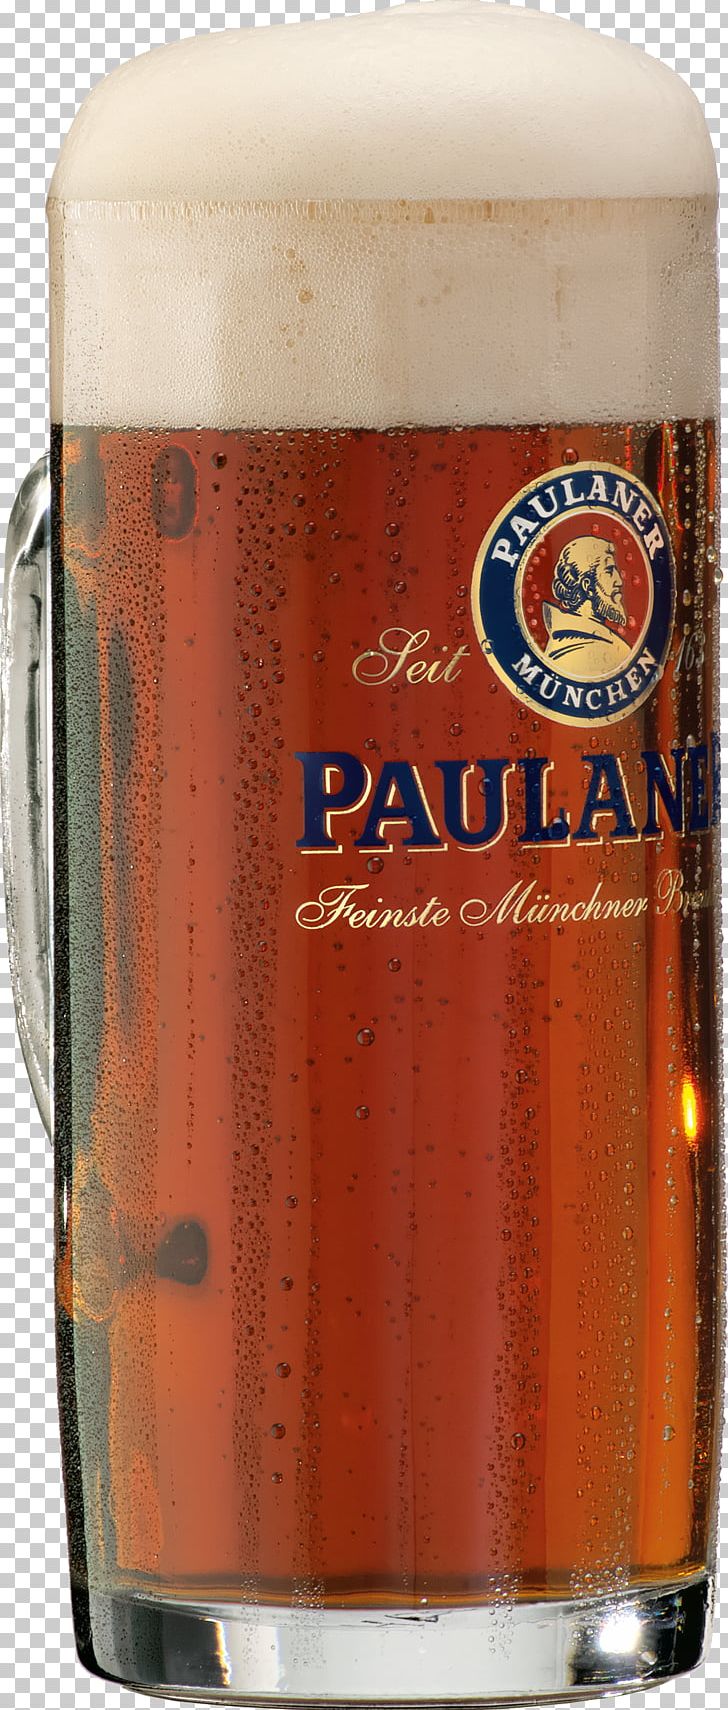 Lager Wheat Beer Paulaner Brewery Dunkel Ale PNG, Clipart, Alcoholic Beverage, Ale, Beer, Beer Glass, Beer Glasses Free PNG Download